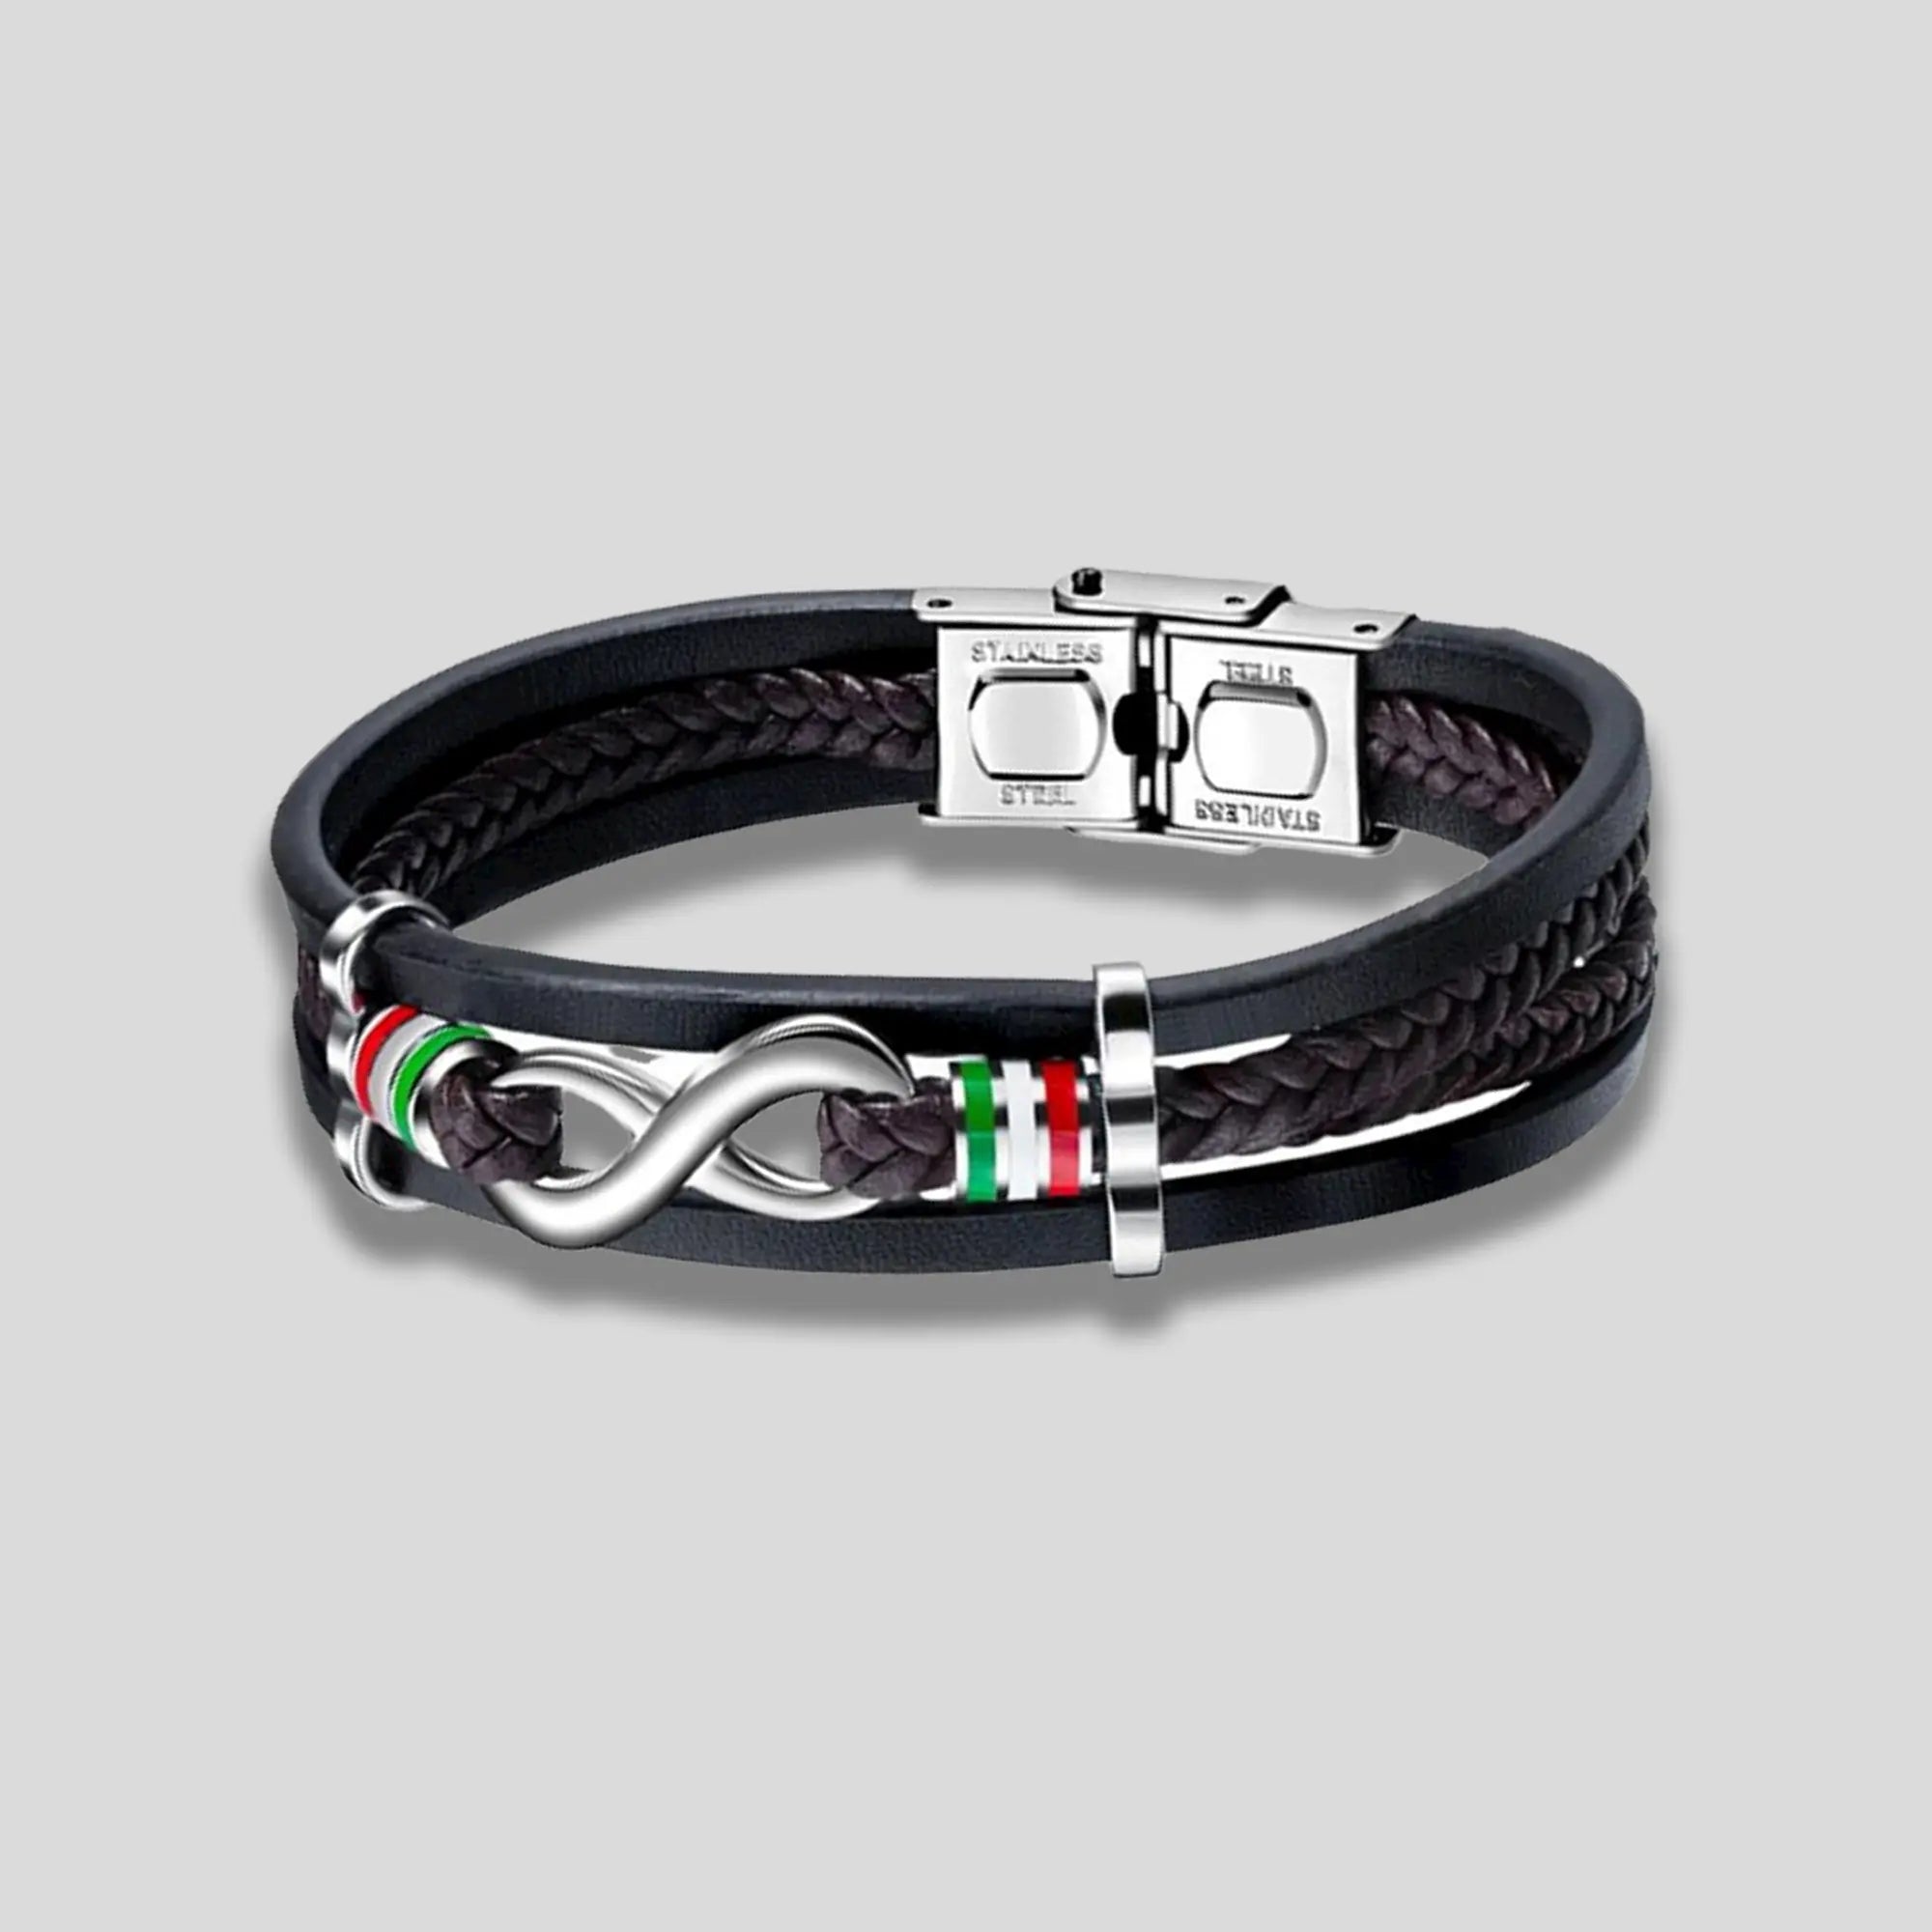 Leather Infinity Bracelets With Charms Glen Ogal